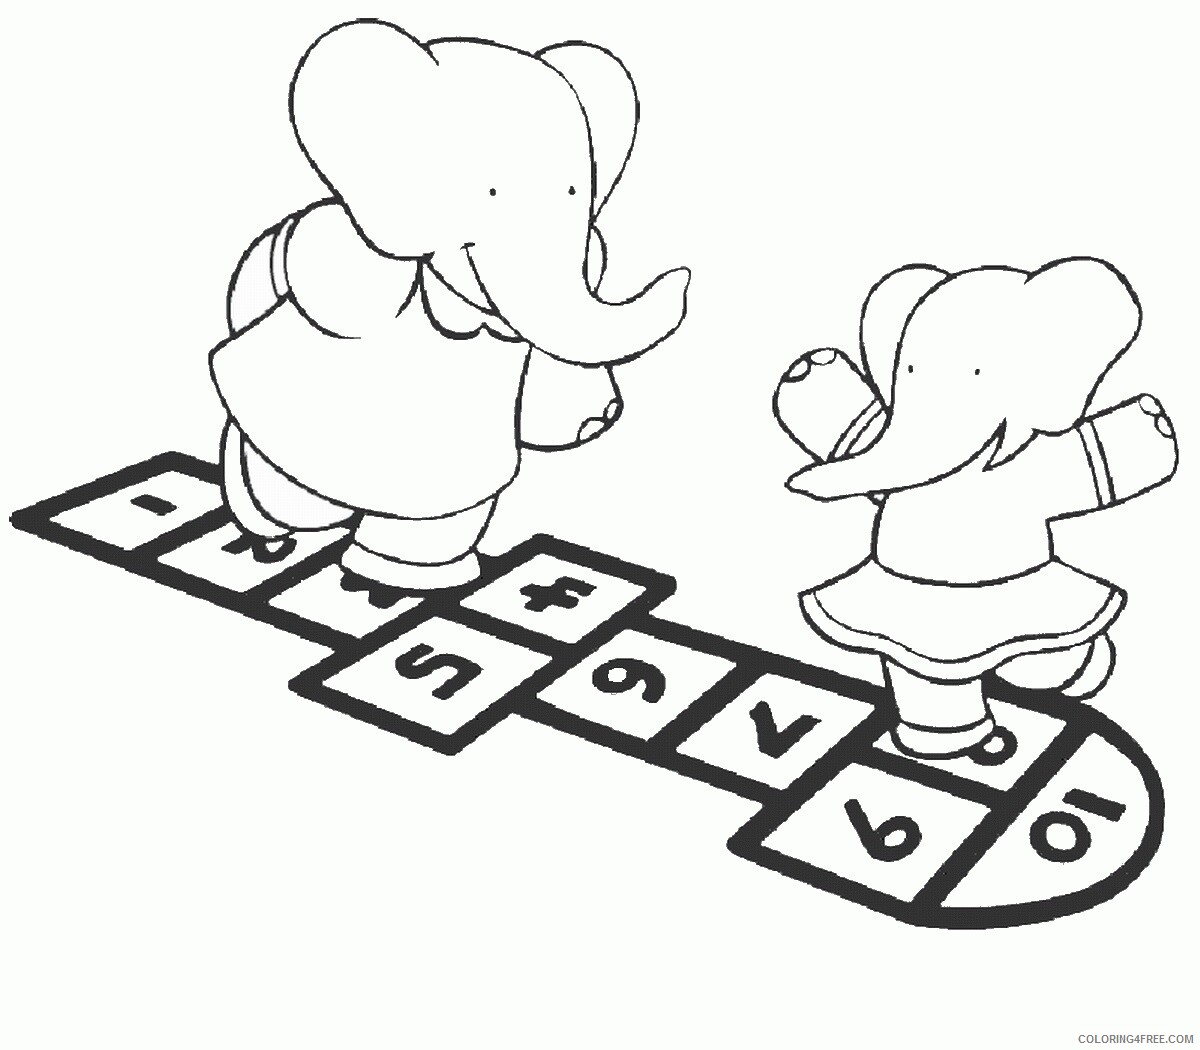 Babar Coloring Pages TV Film babar_cl_04 Printable 2020 00362 Coloring4free